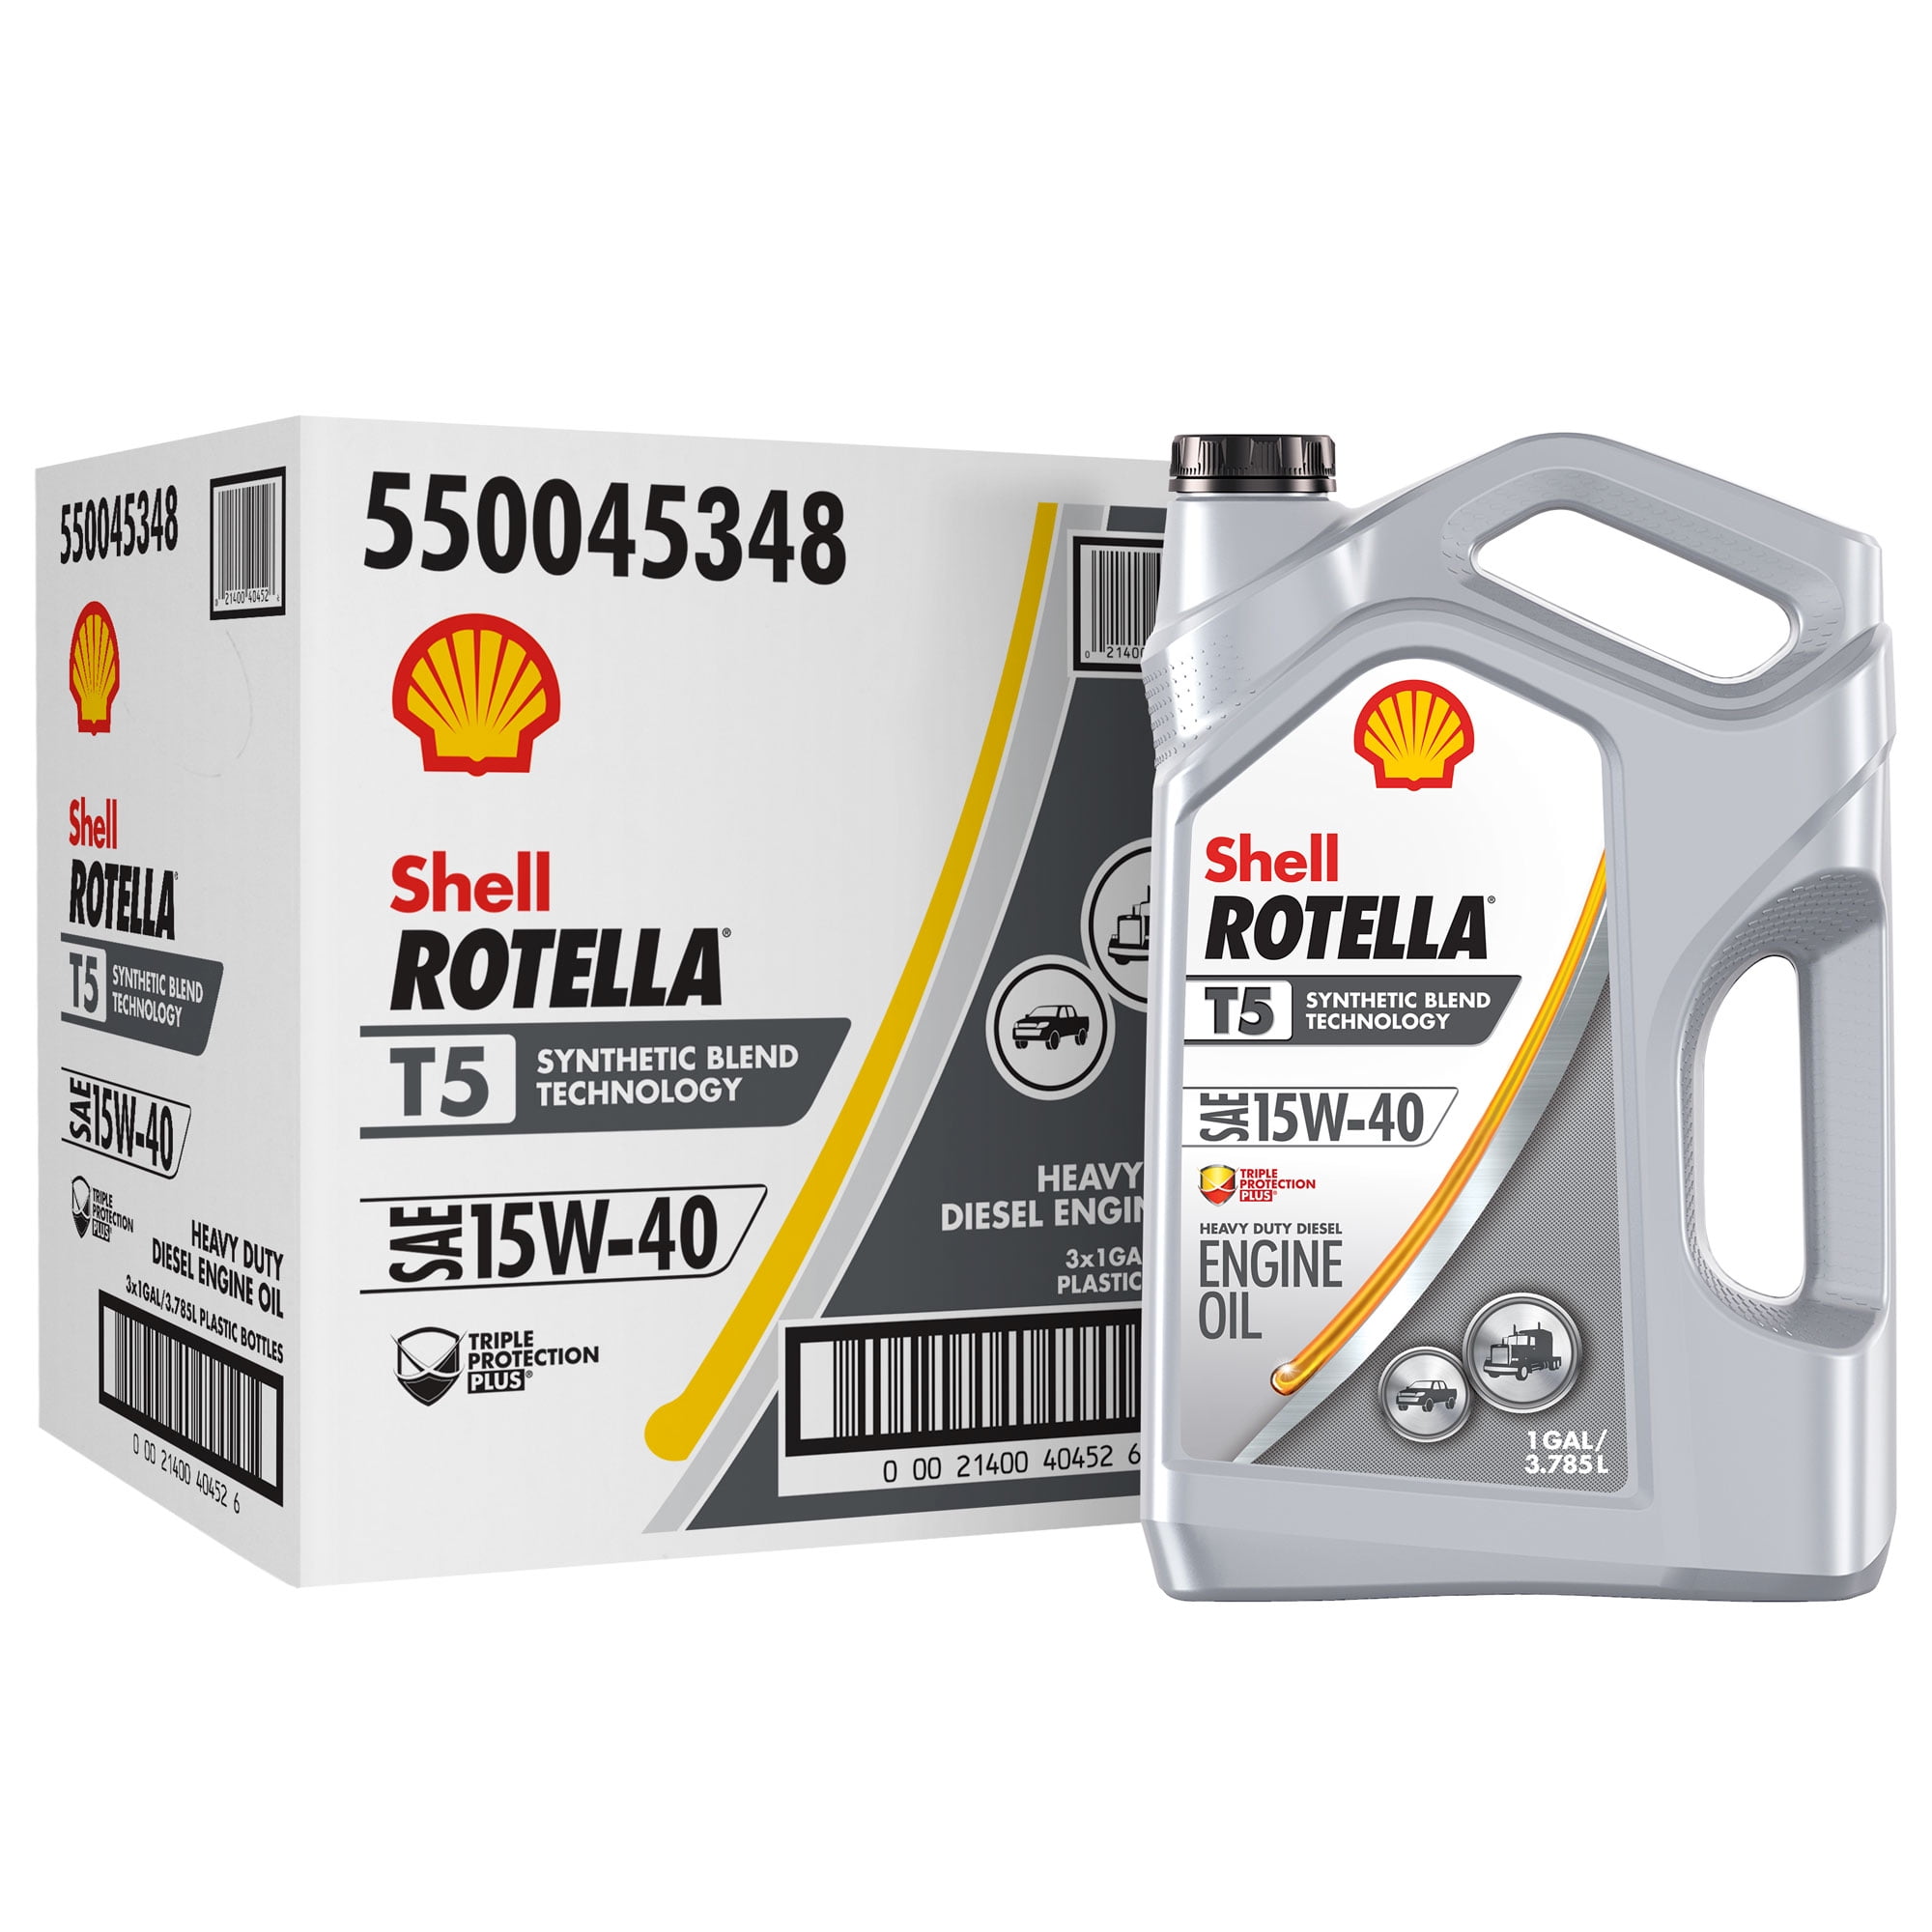 Is Rotella T5 Synthetic